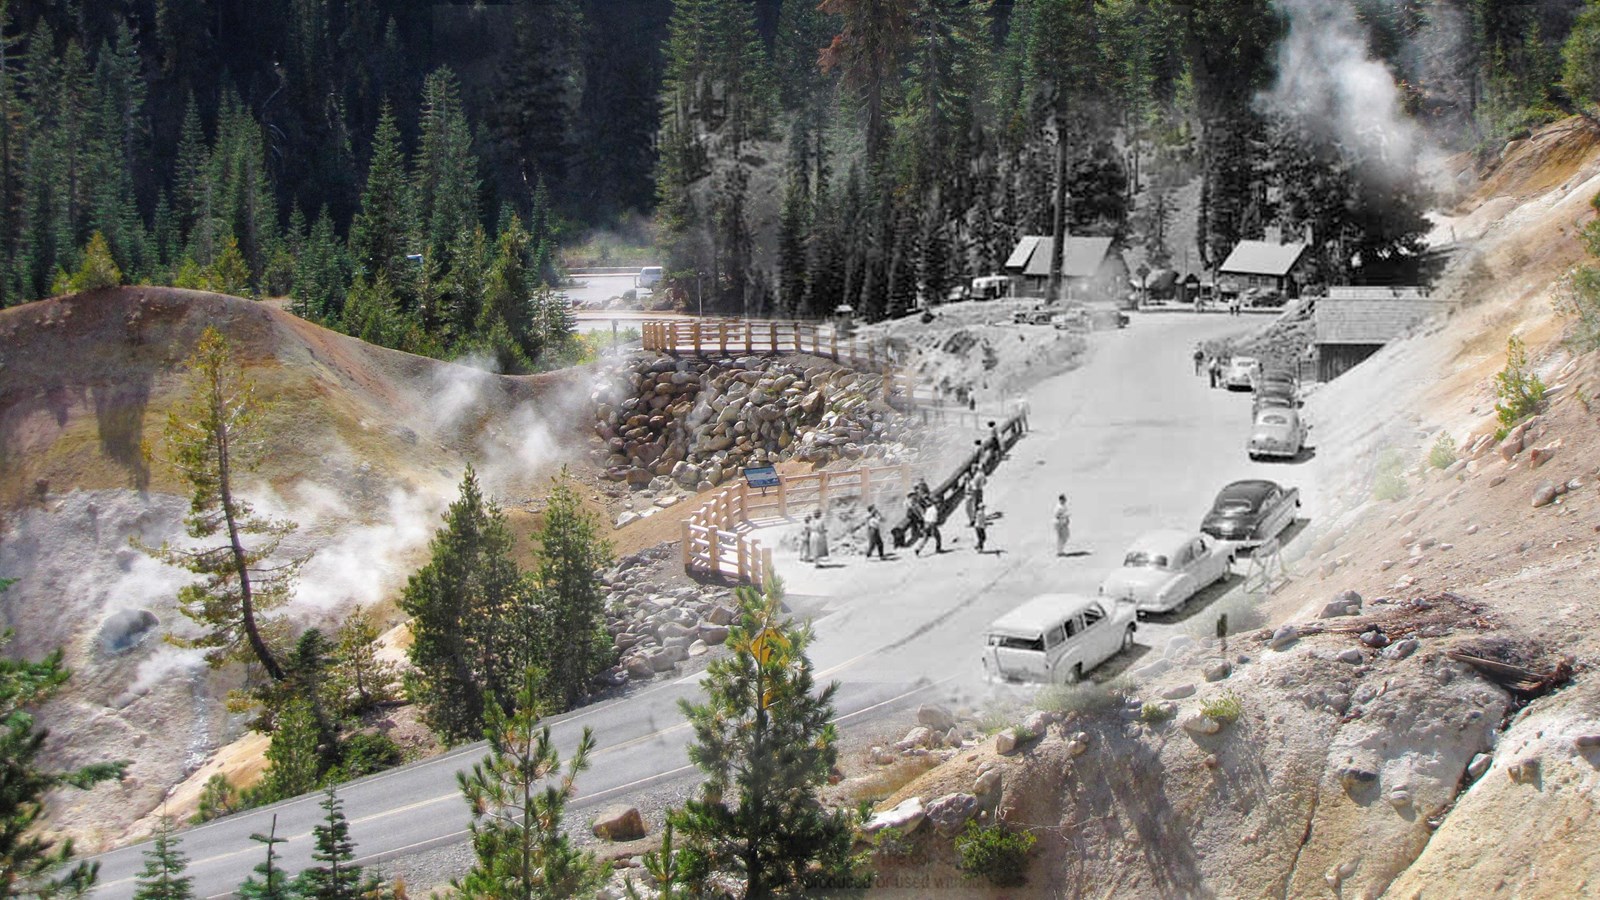 An image of a hydrothermal area with an overlay of a black and white image of a roadside attraction.